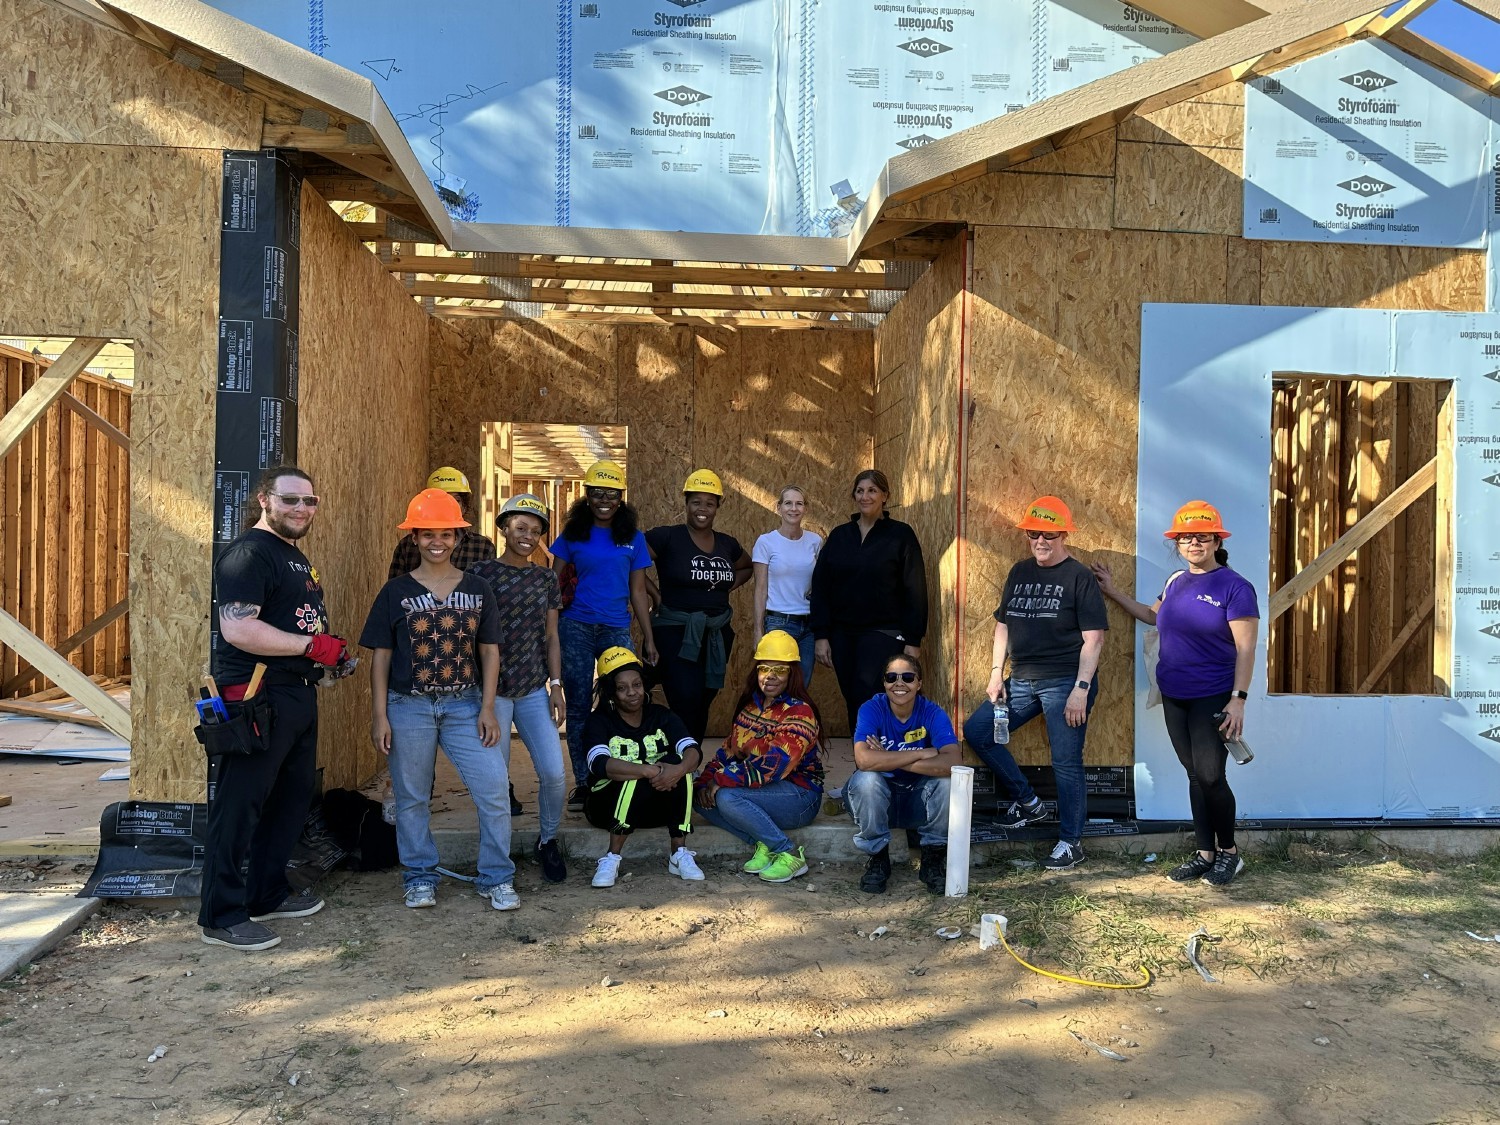 The Flagship crew stepped up, putting their volunteer time off to good use as they teamed up with Habitat for Humanity.